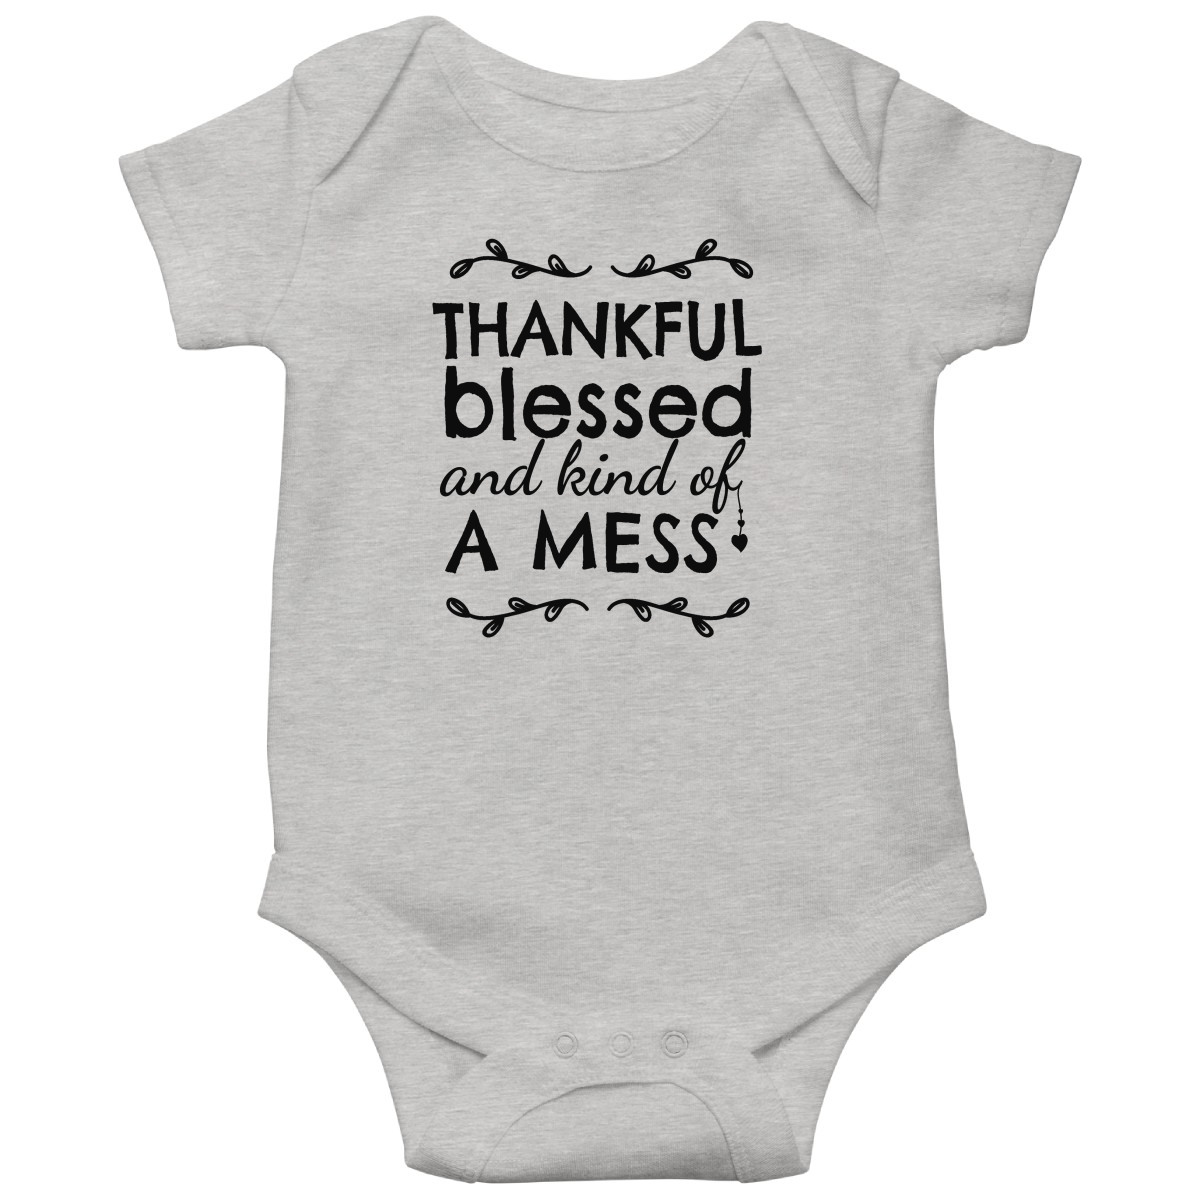 Thankful, Blessed and Kind of a Mess Baby Bodysuits | Gray